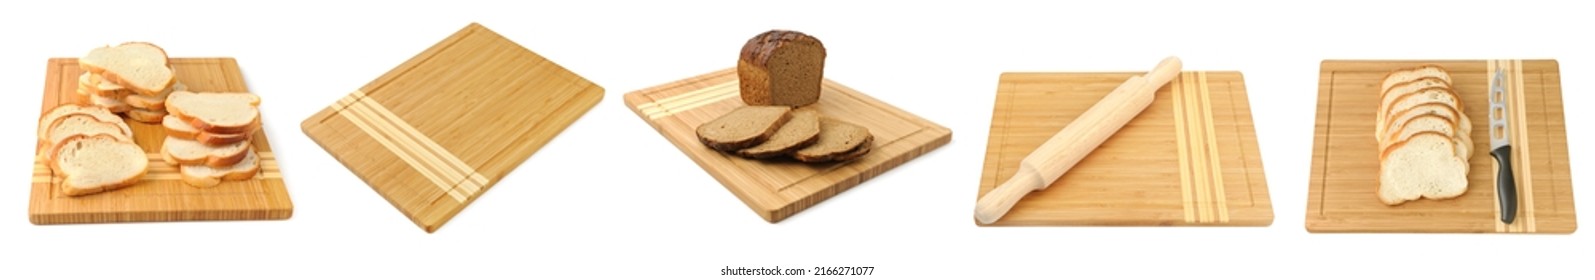 Breadboard for cutting bread, rolling pin and sliced bread isolated on white background. Panoramic photo.